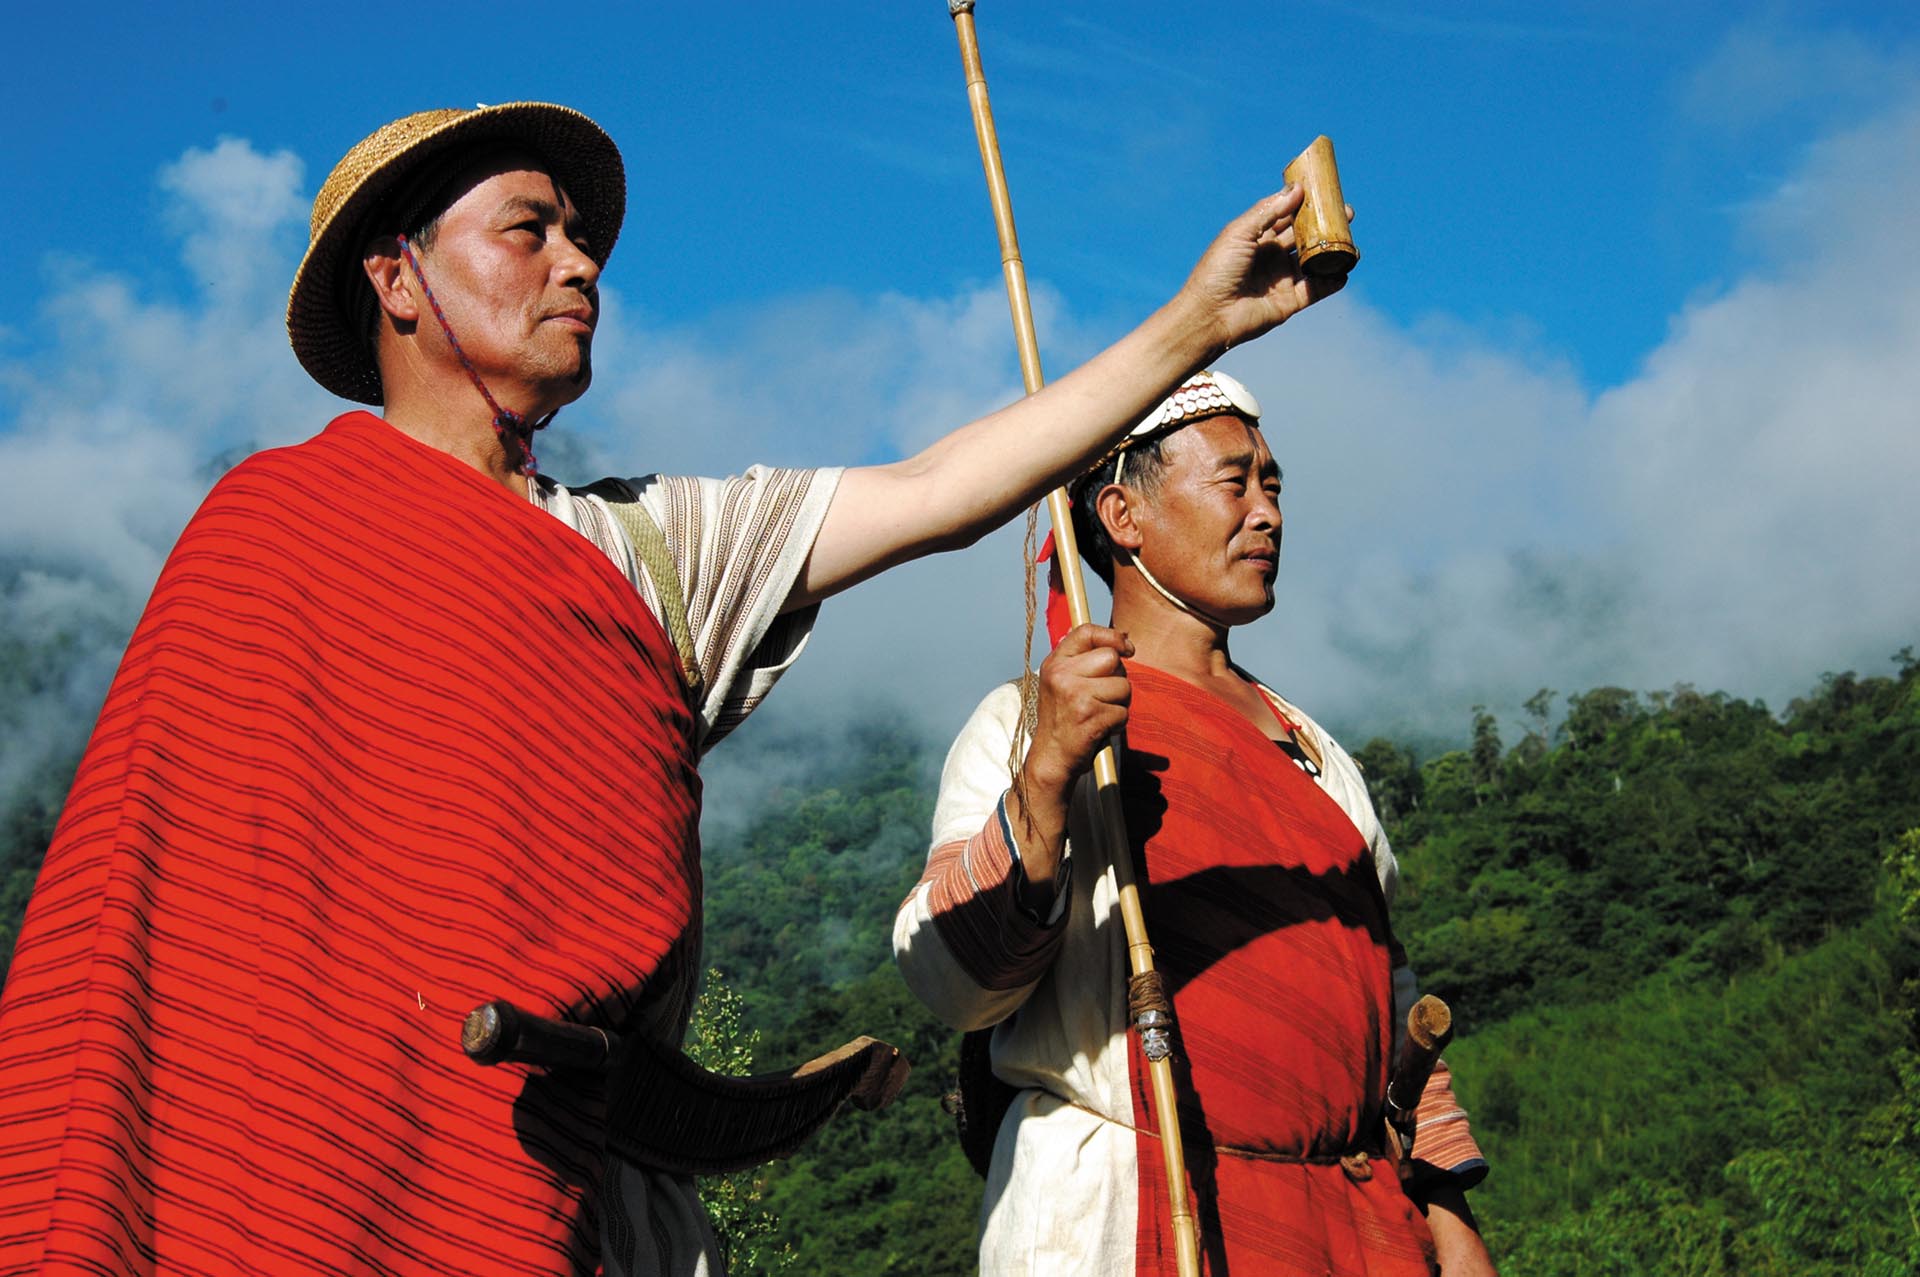 Before conducting a ceremony event, Atayal people would talk to utux bnkis (the spirits of the ancestors) to ask for the blessing of the ancestors.